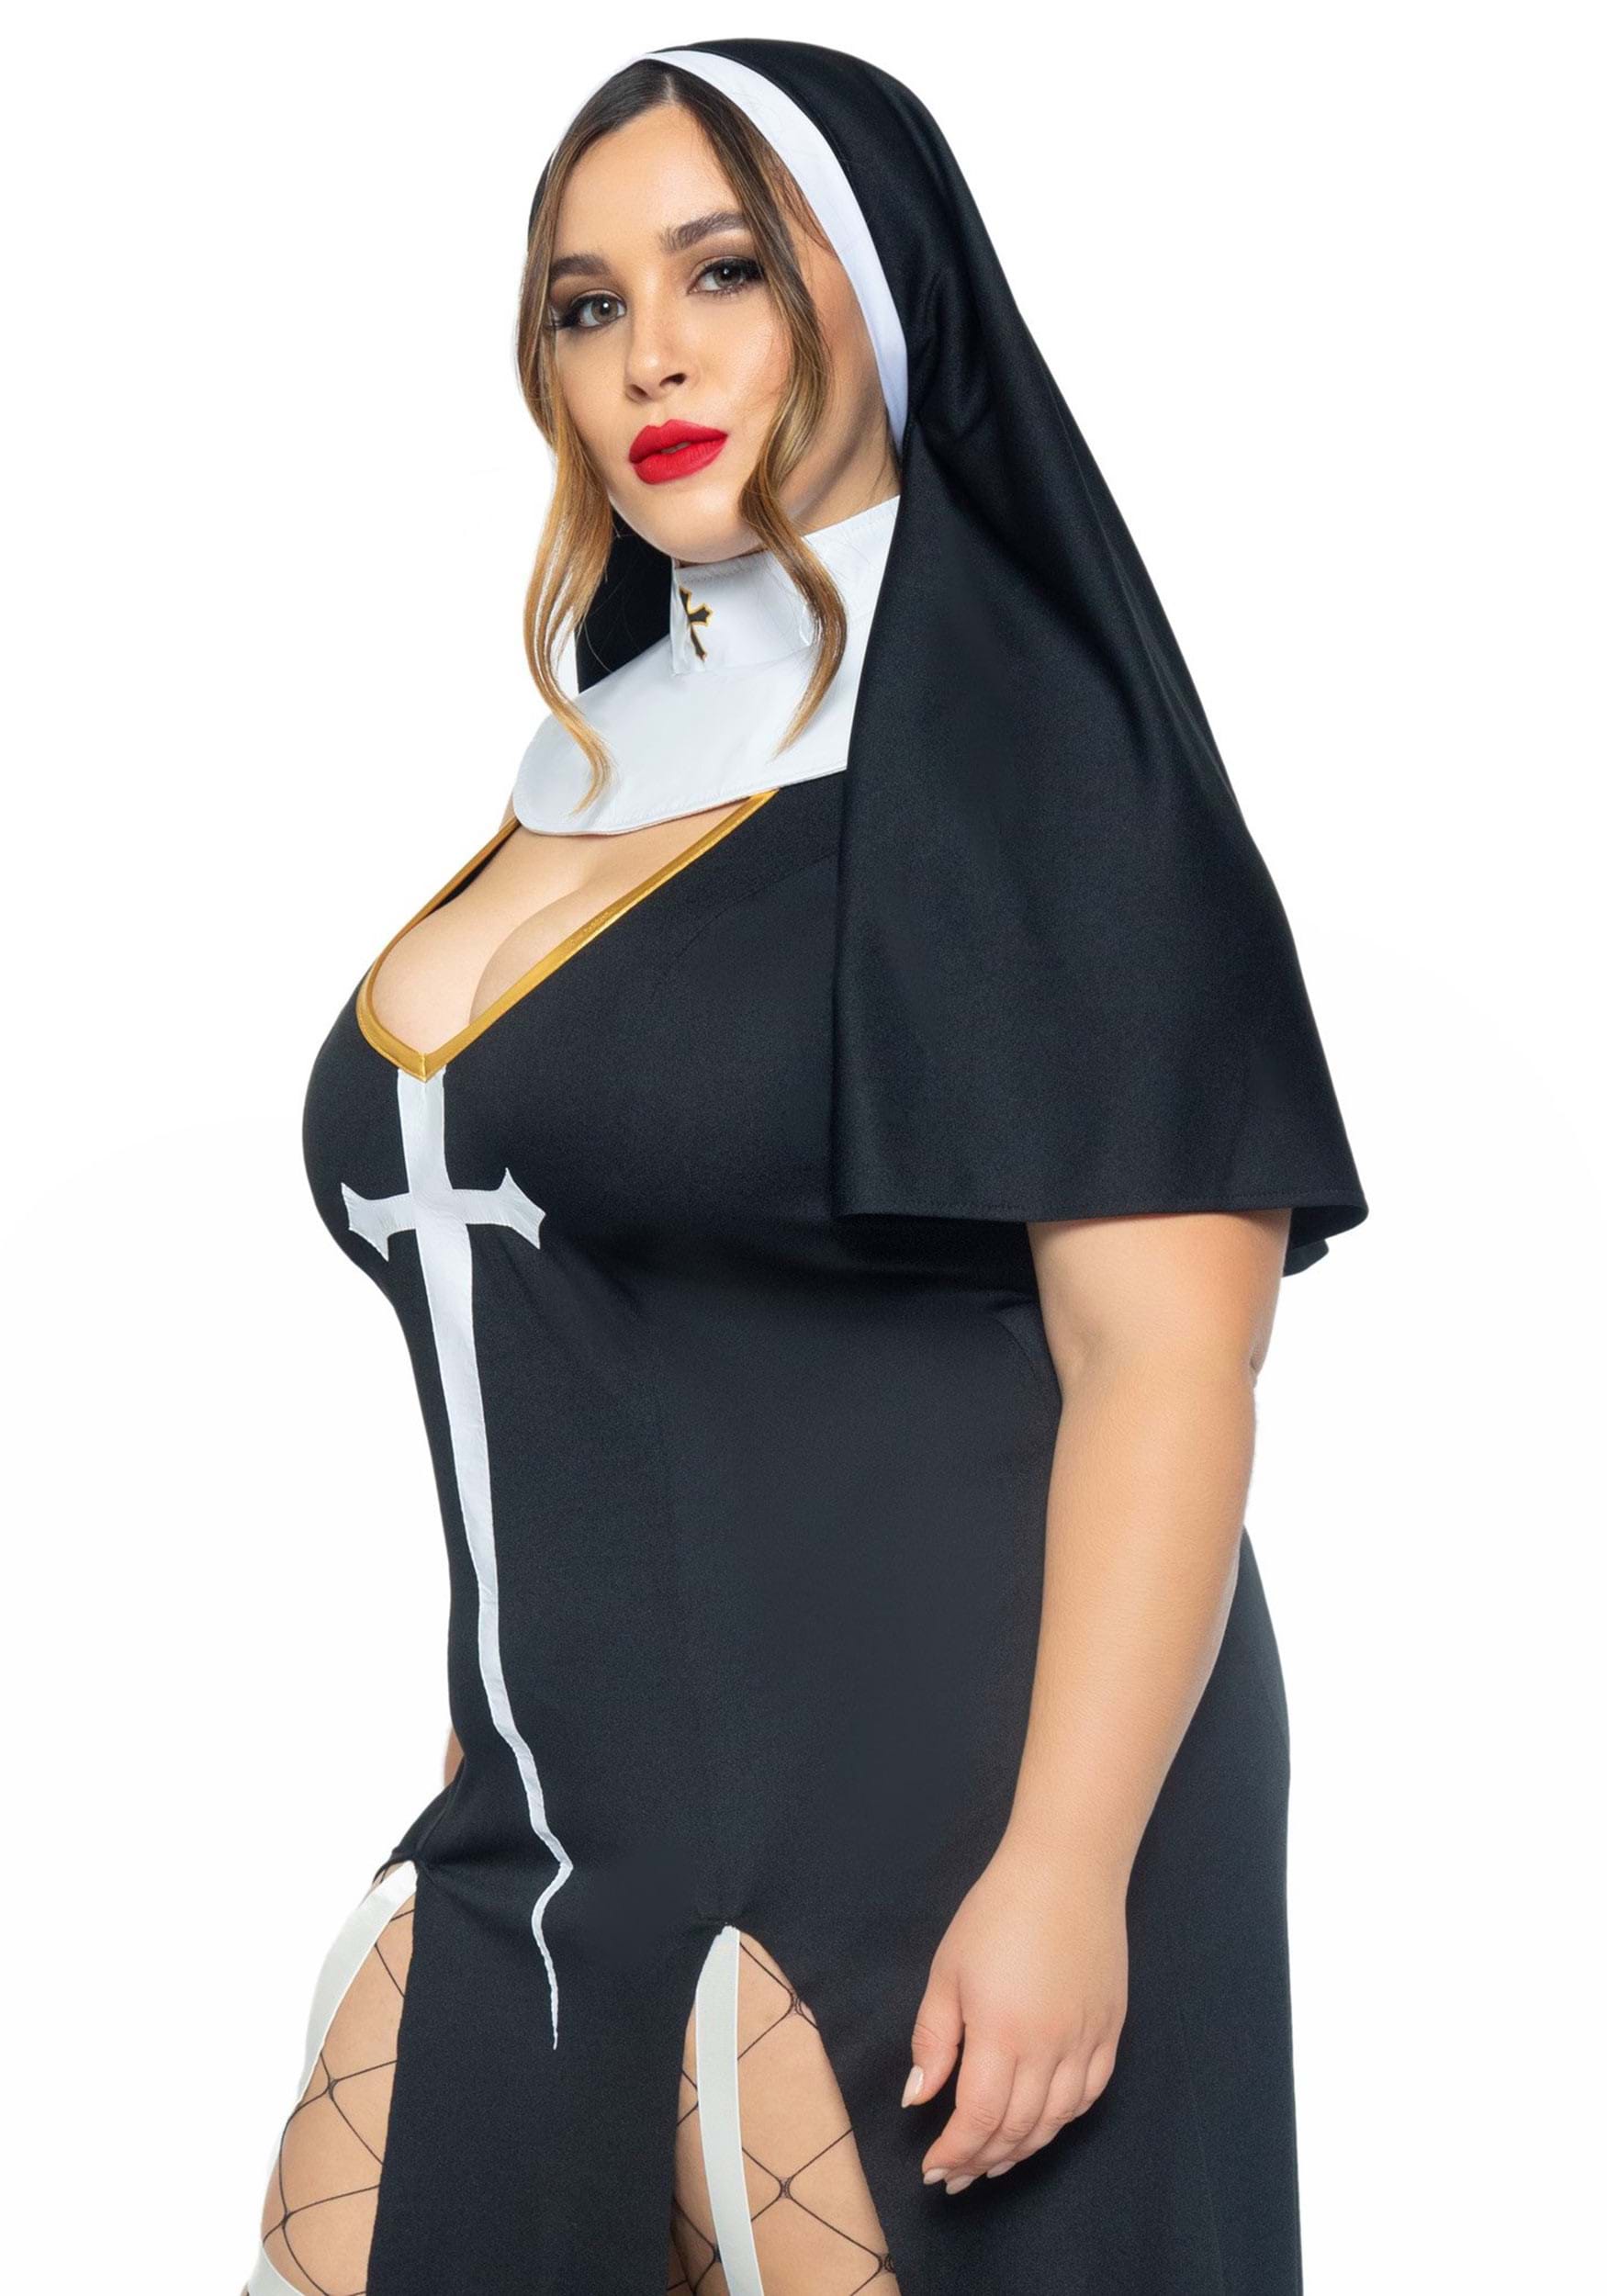 Women's Sexy Sultry Sinner Plus Size Costume